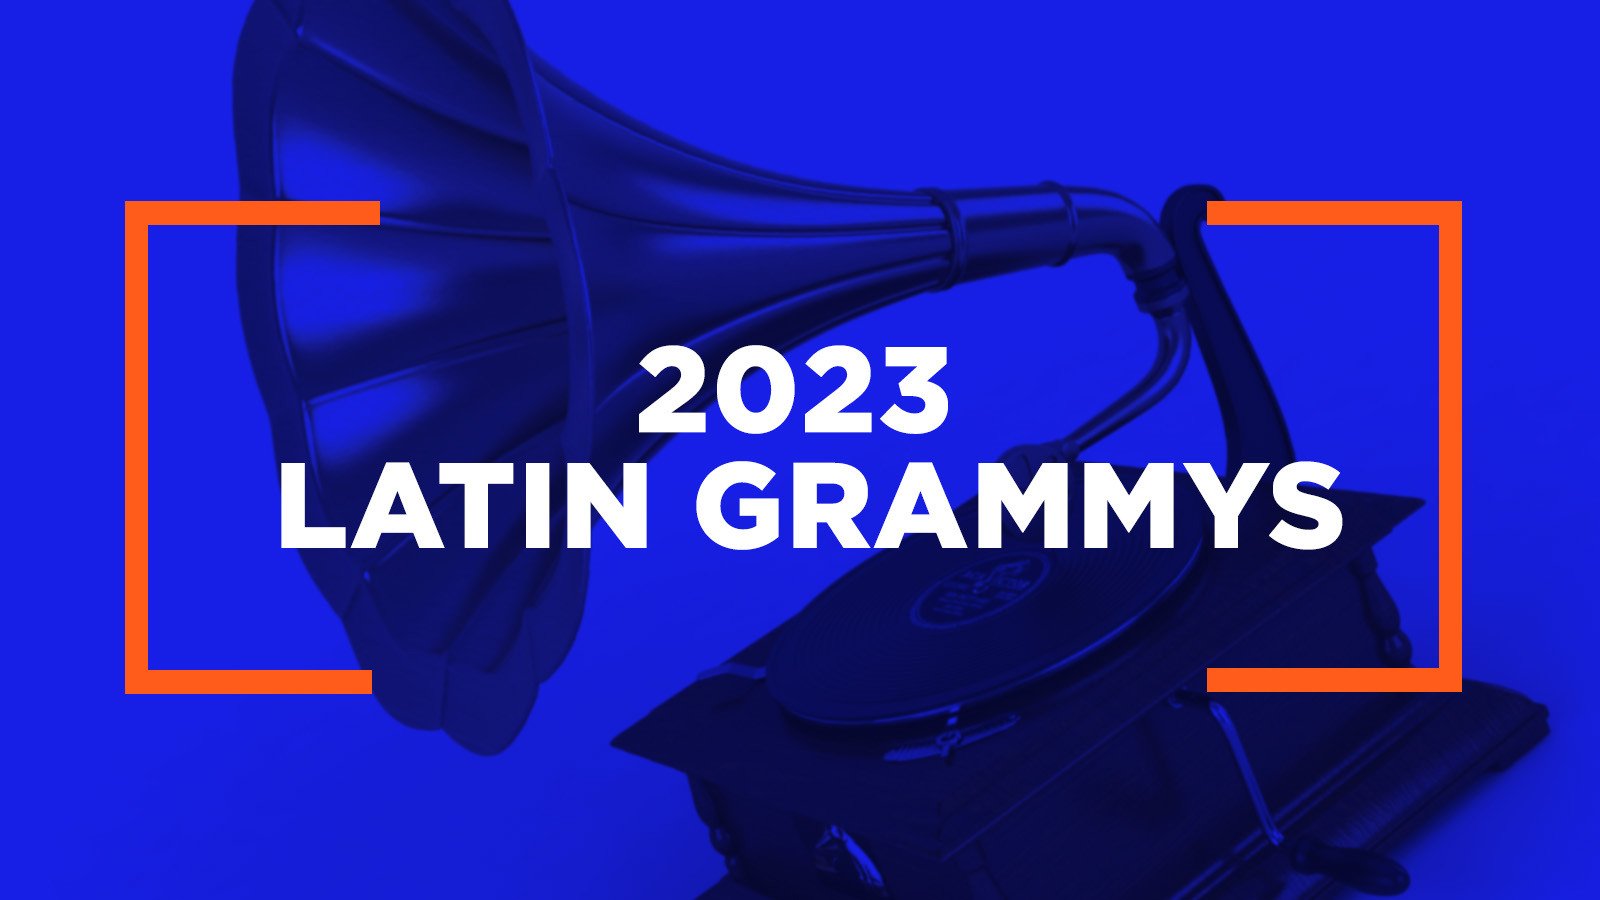 A graphic of a gramophone on a blue background. The words 2023 Latin Grammys are overlaid in white.